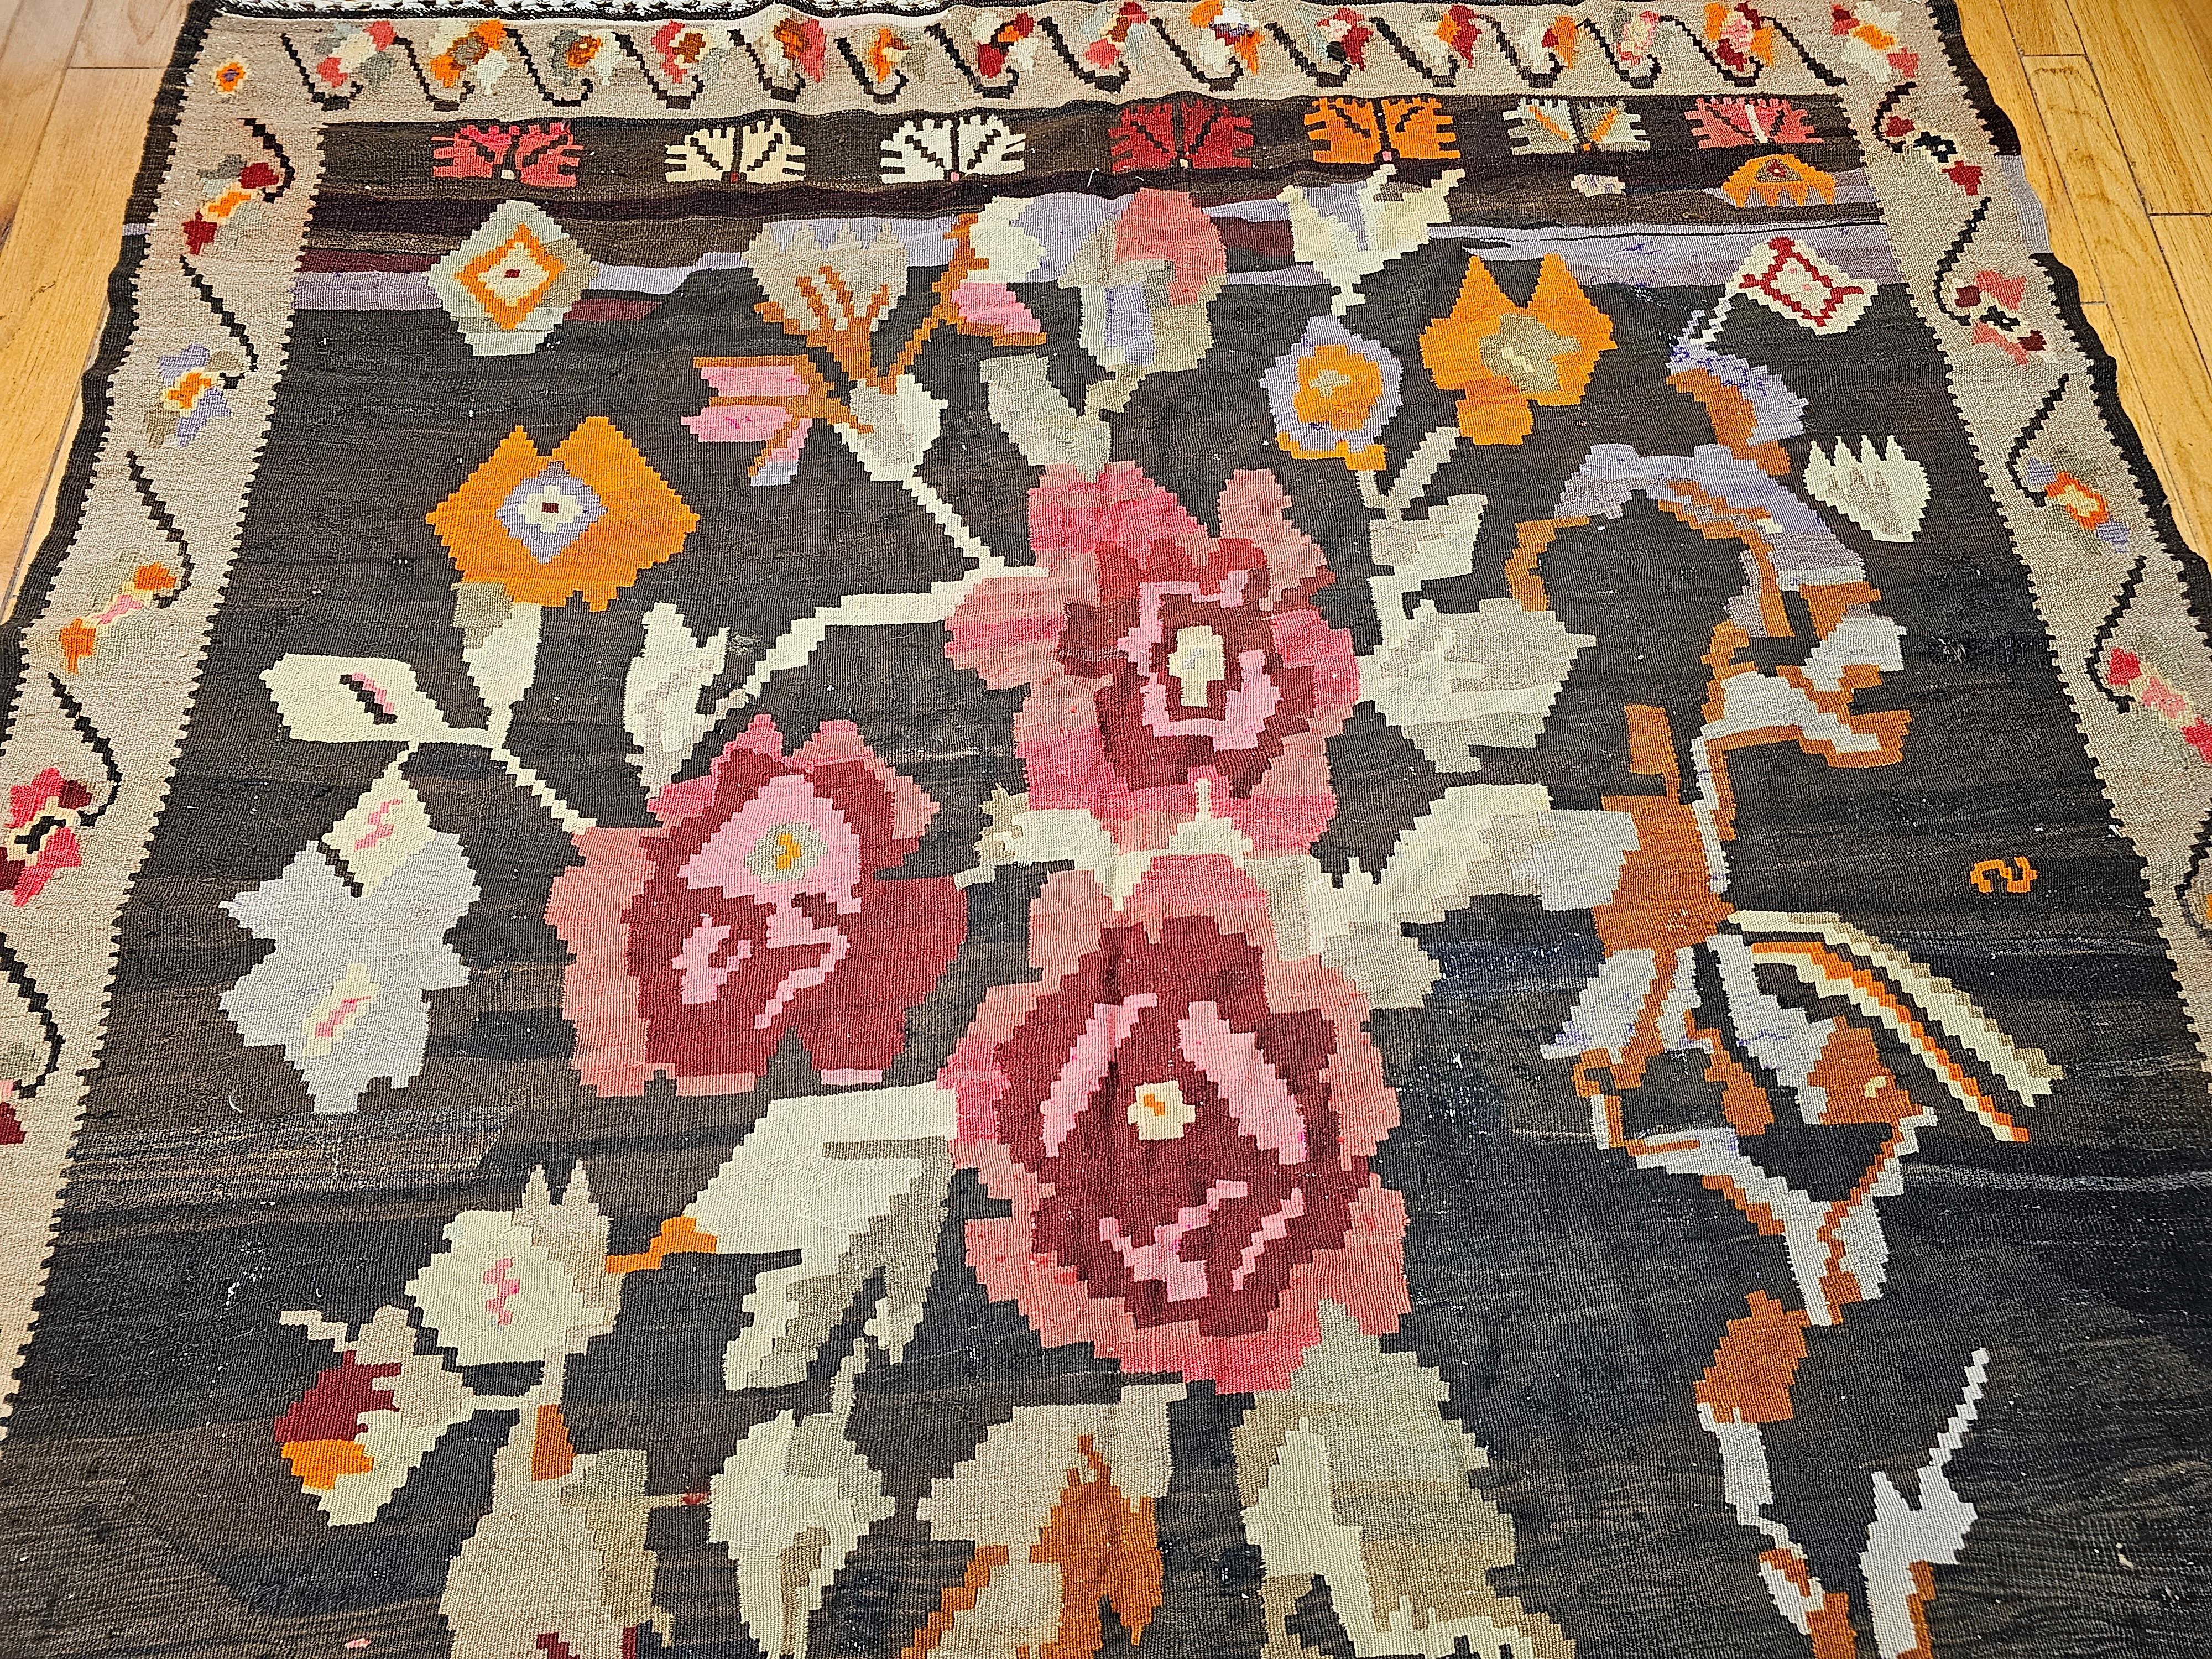 Vintage Karabagh Kilim with Large Floral Pattern in Dark Chocolate, Khaki, Ivory In Good Condition For Sale In Barrington, IL